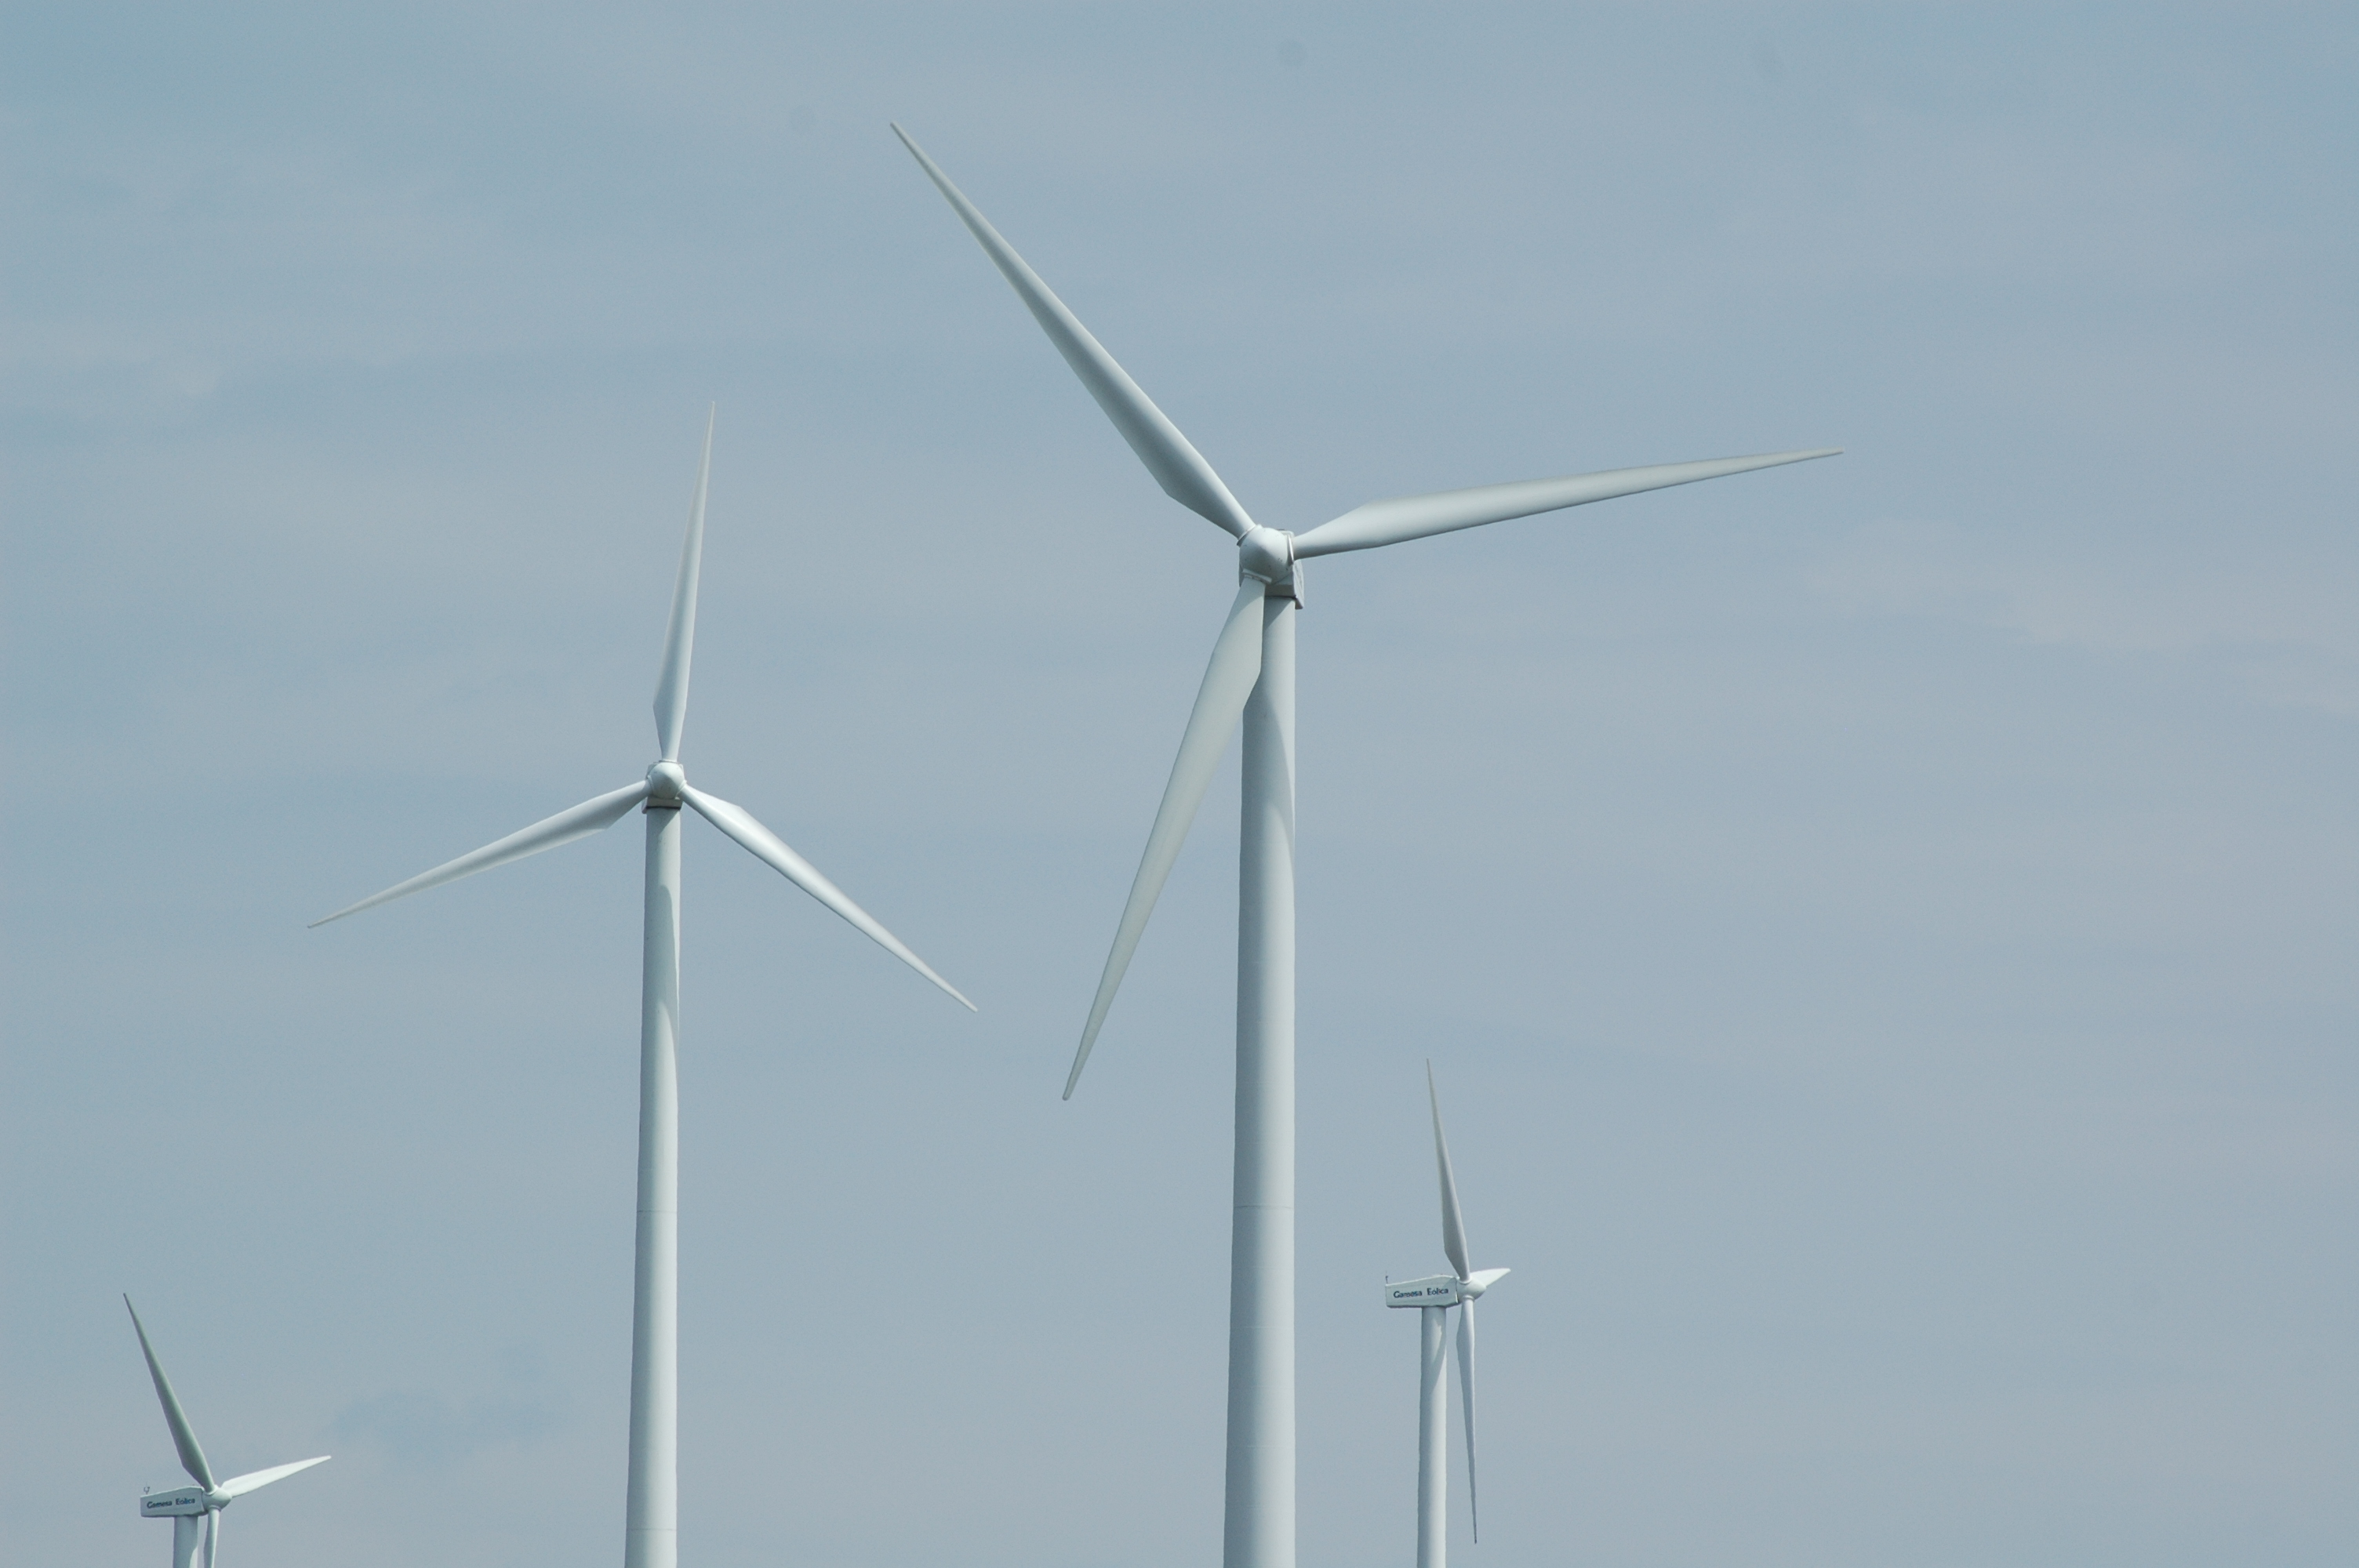 WRG secures first wind farm planning approval